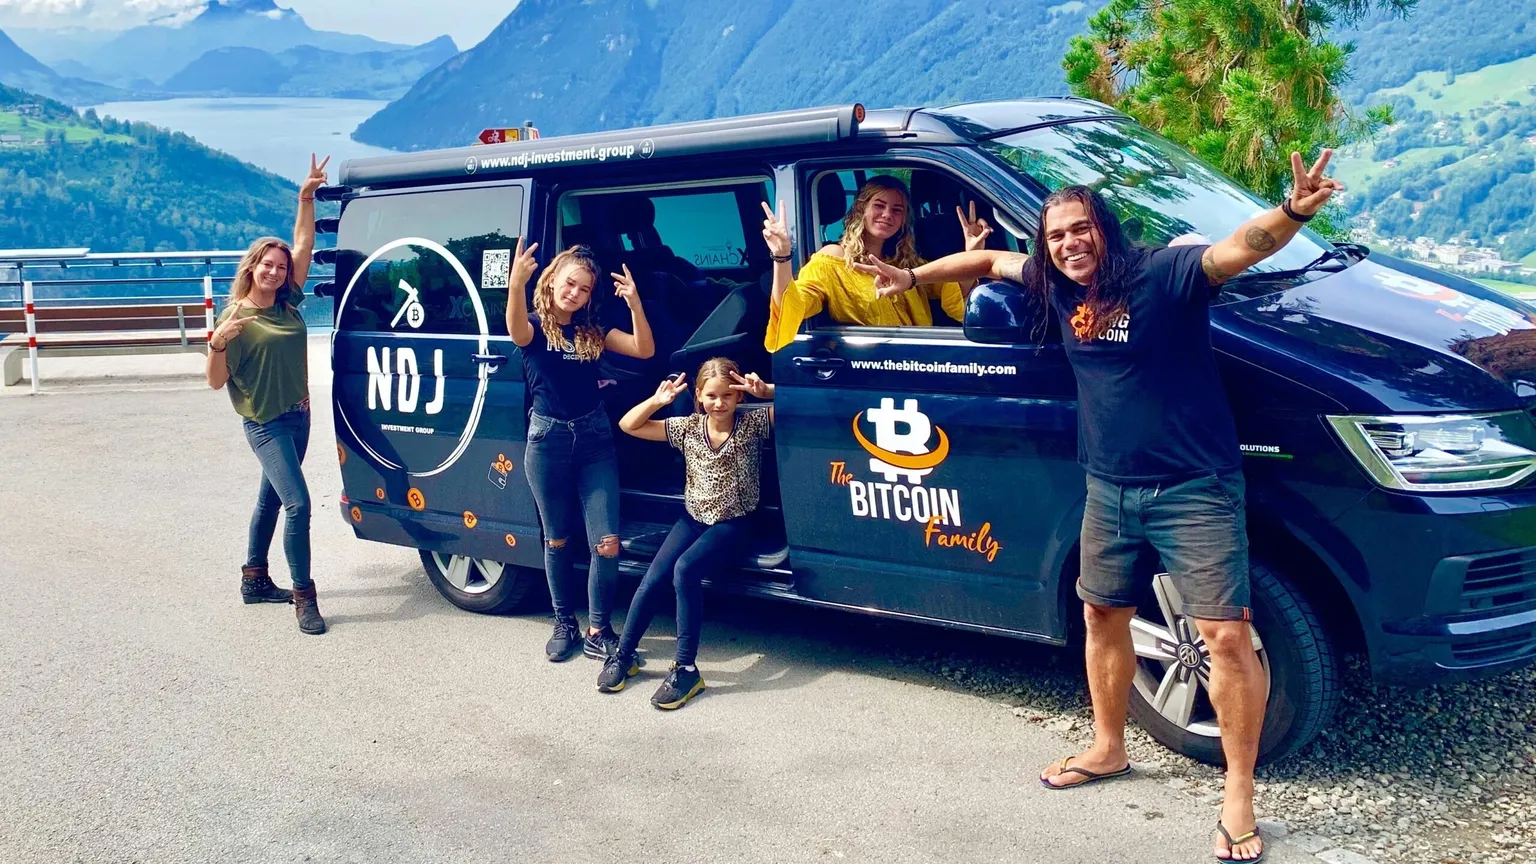 The Bitcoin Family on tour  near Zug, Switzerland. Image: The Bit.coin Family